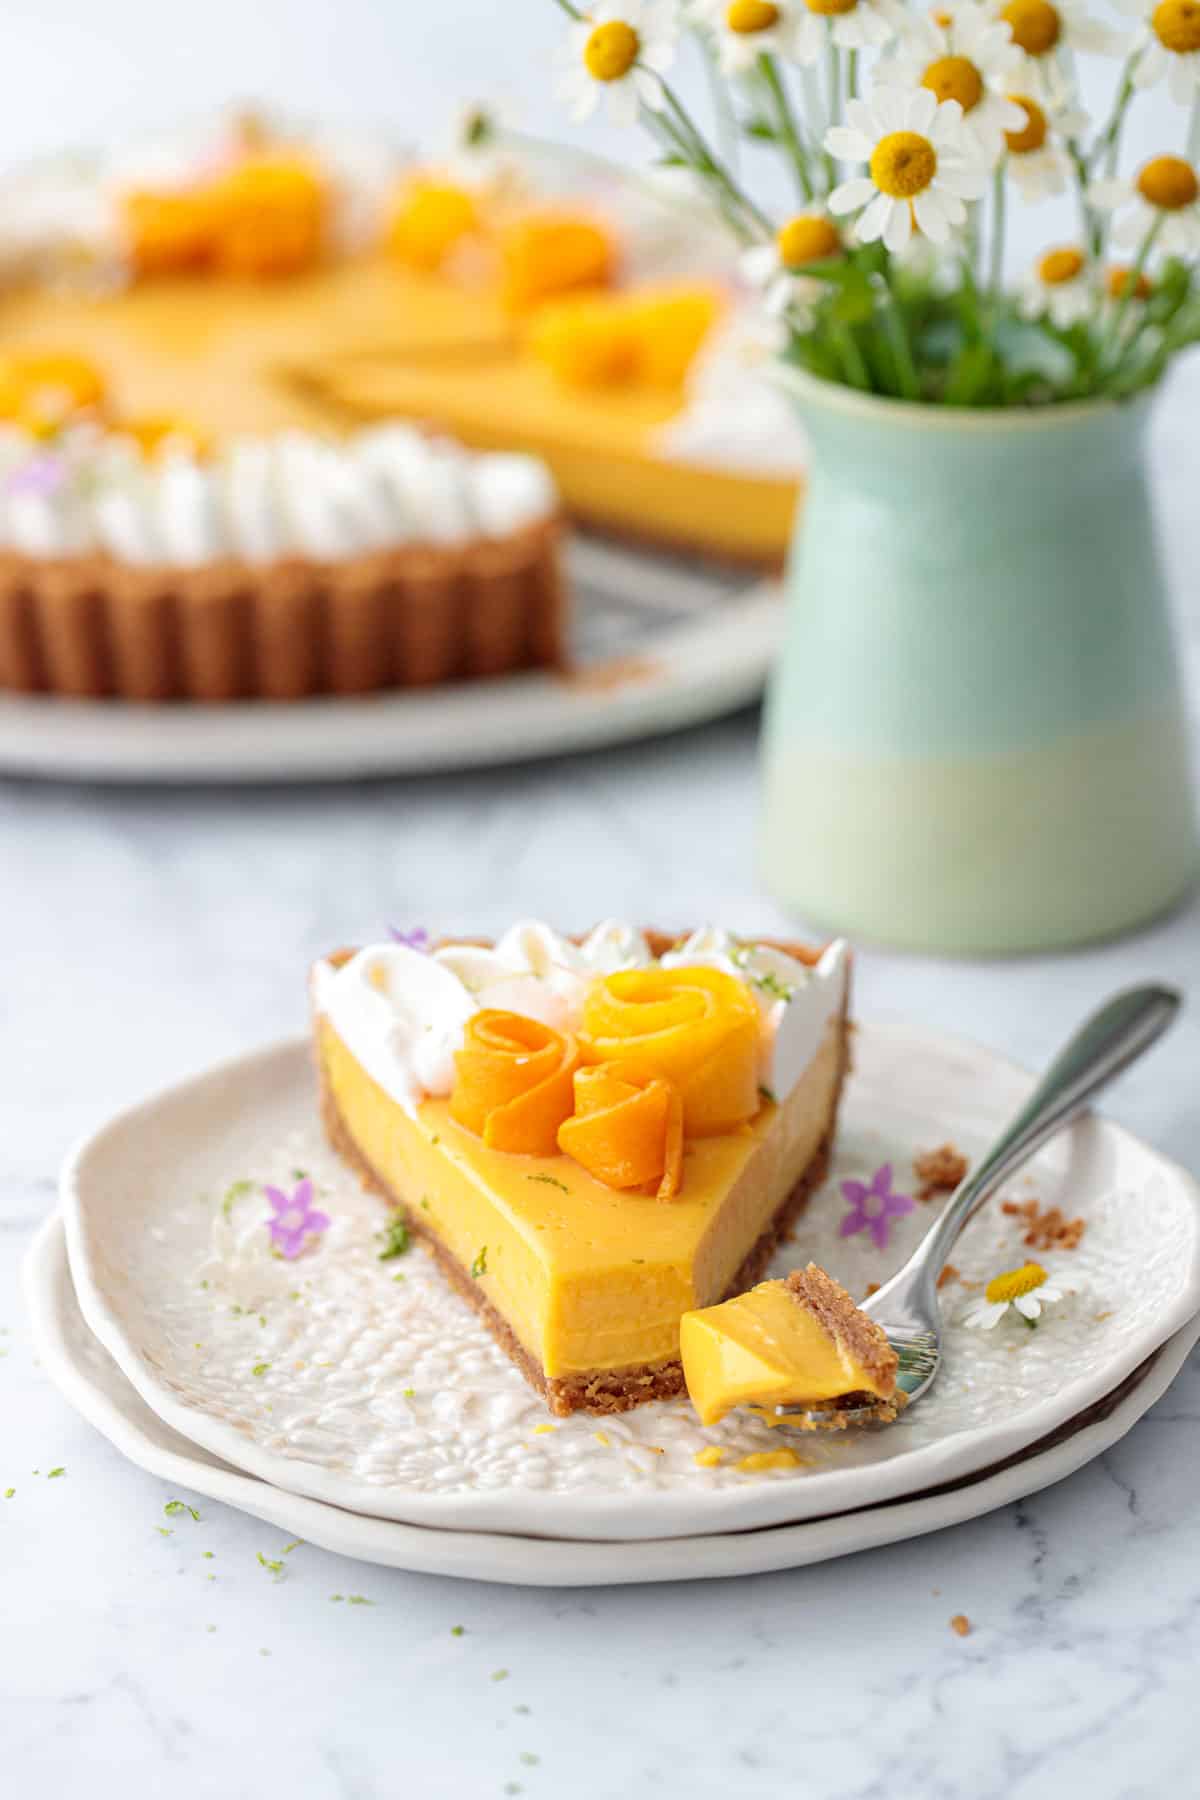 Slice of Mango Lime Tart on a plate with a forkful on the side to show the creamy texture, with vase of flowers and rest of the tart in the background.